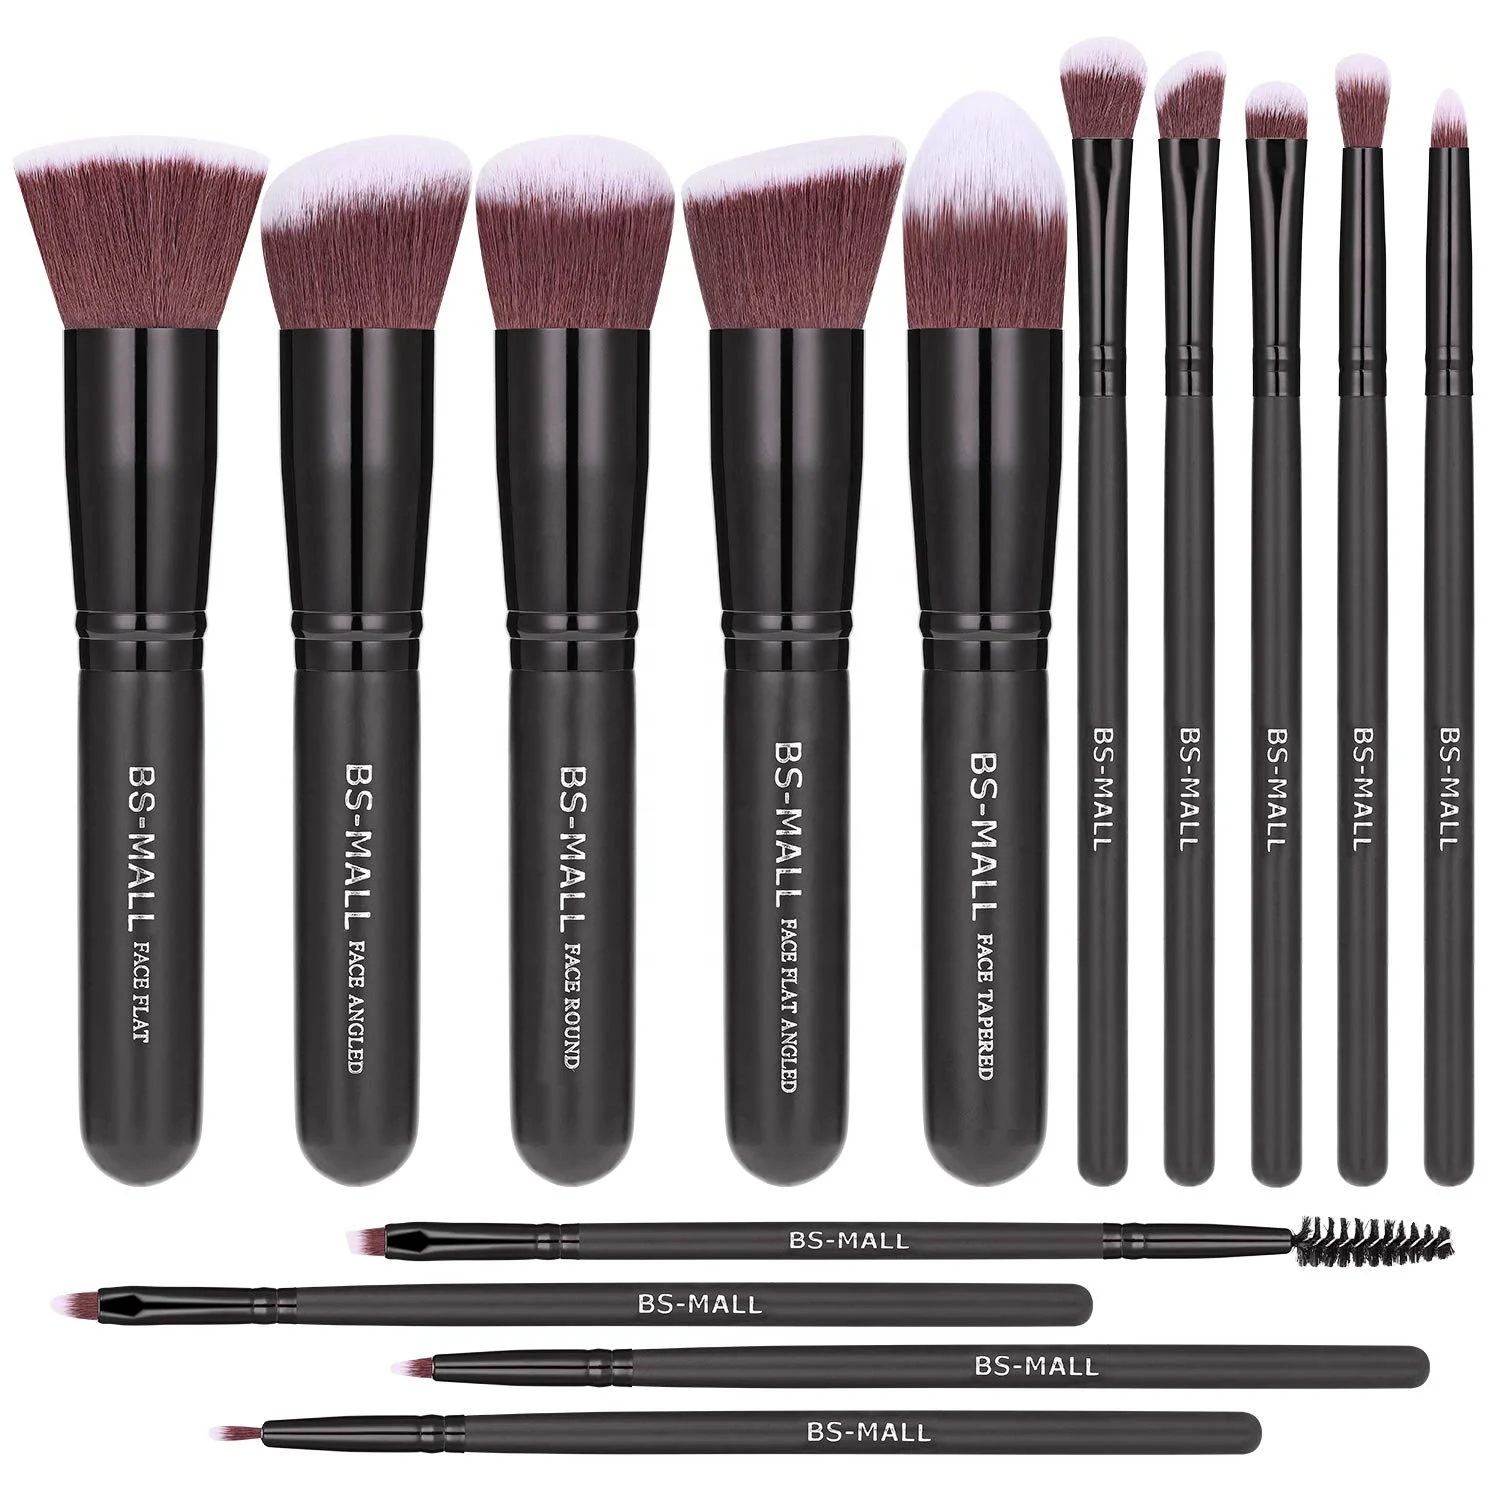 

BS-MALL Black Make Up Cosmetic Brush Set 14PCS Vegan Synthetic Private Label Girls Make Up Brushes set